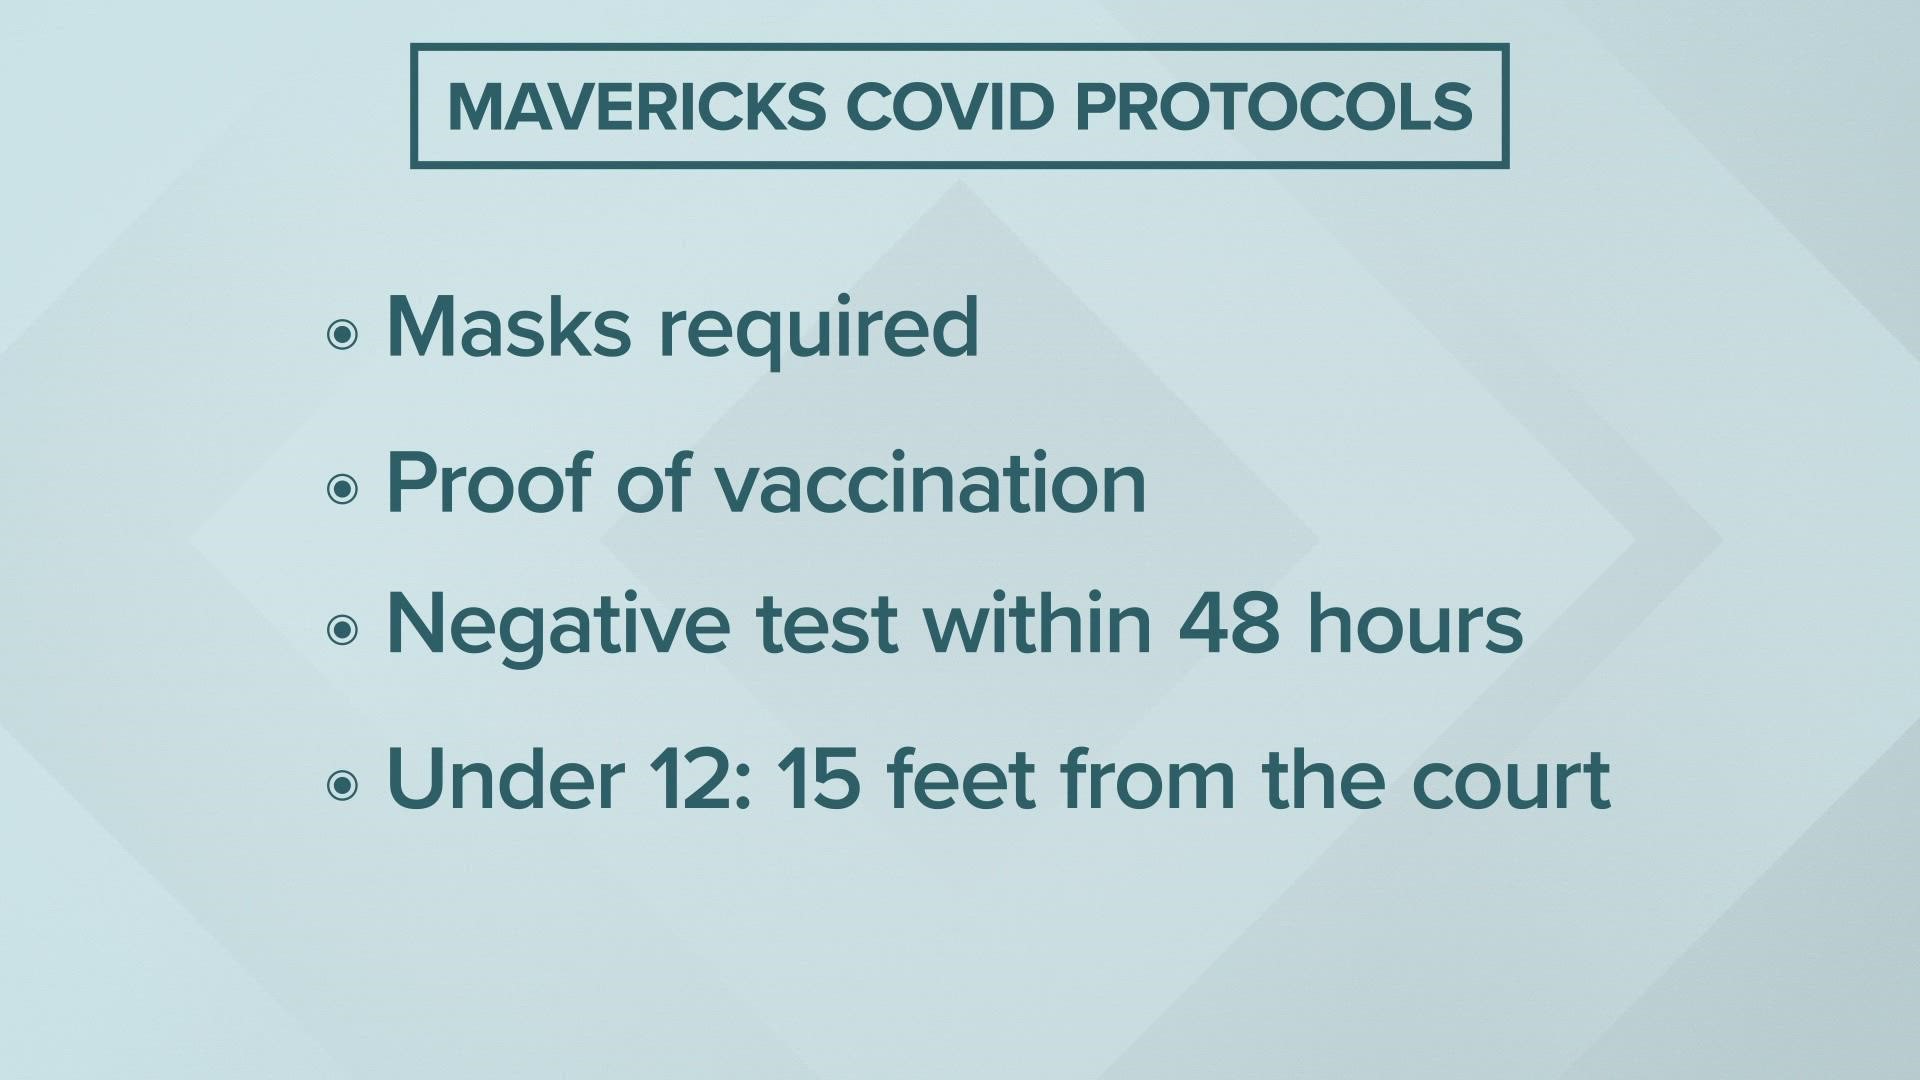 The Mavericks will also require all fans 2 and older to wear a mask inside the arena, regardless of their vaccination status.